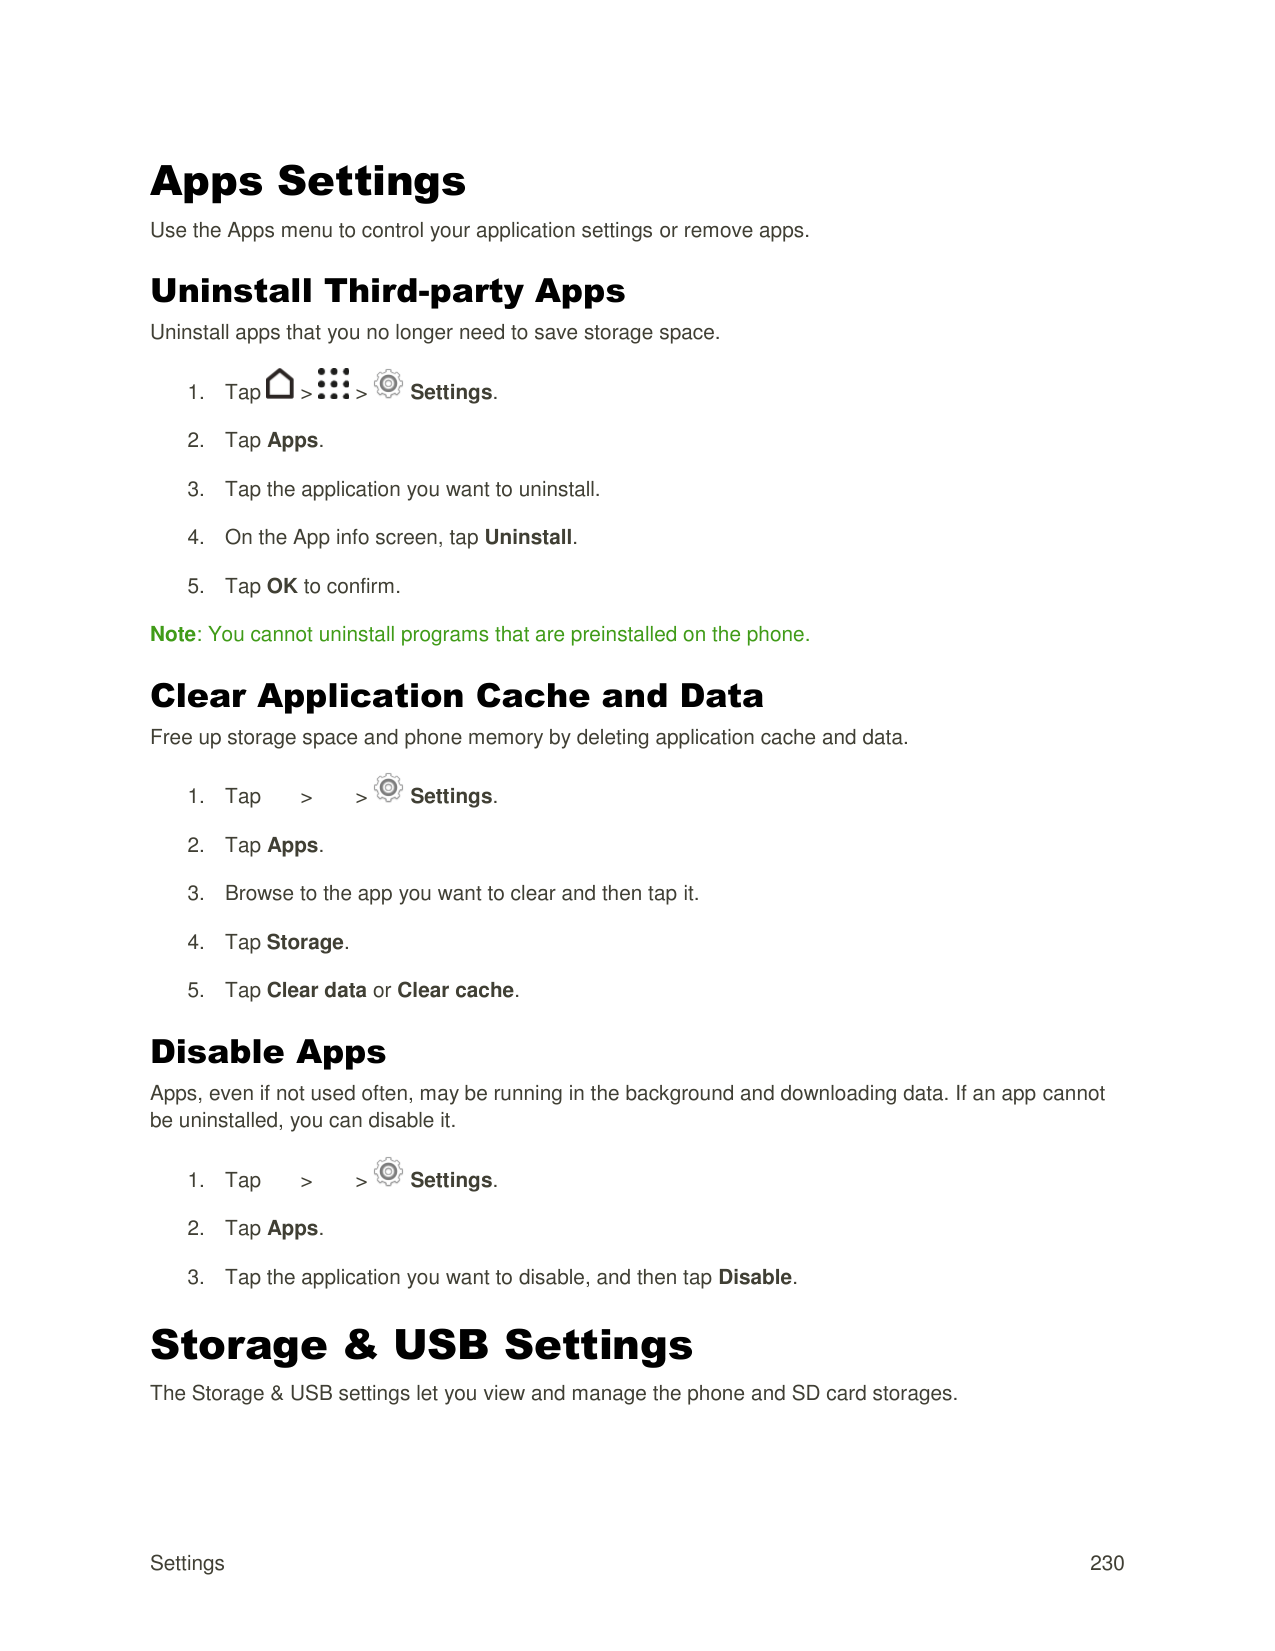 Apps SettingsUse the Apps menu to control your application settings or remove apps.Uninstall Third-party AppsUninstall apps that